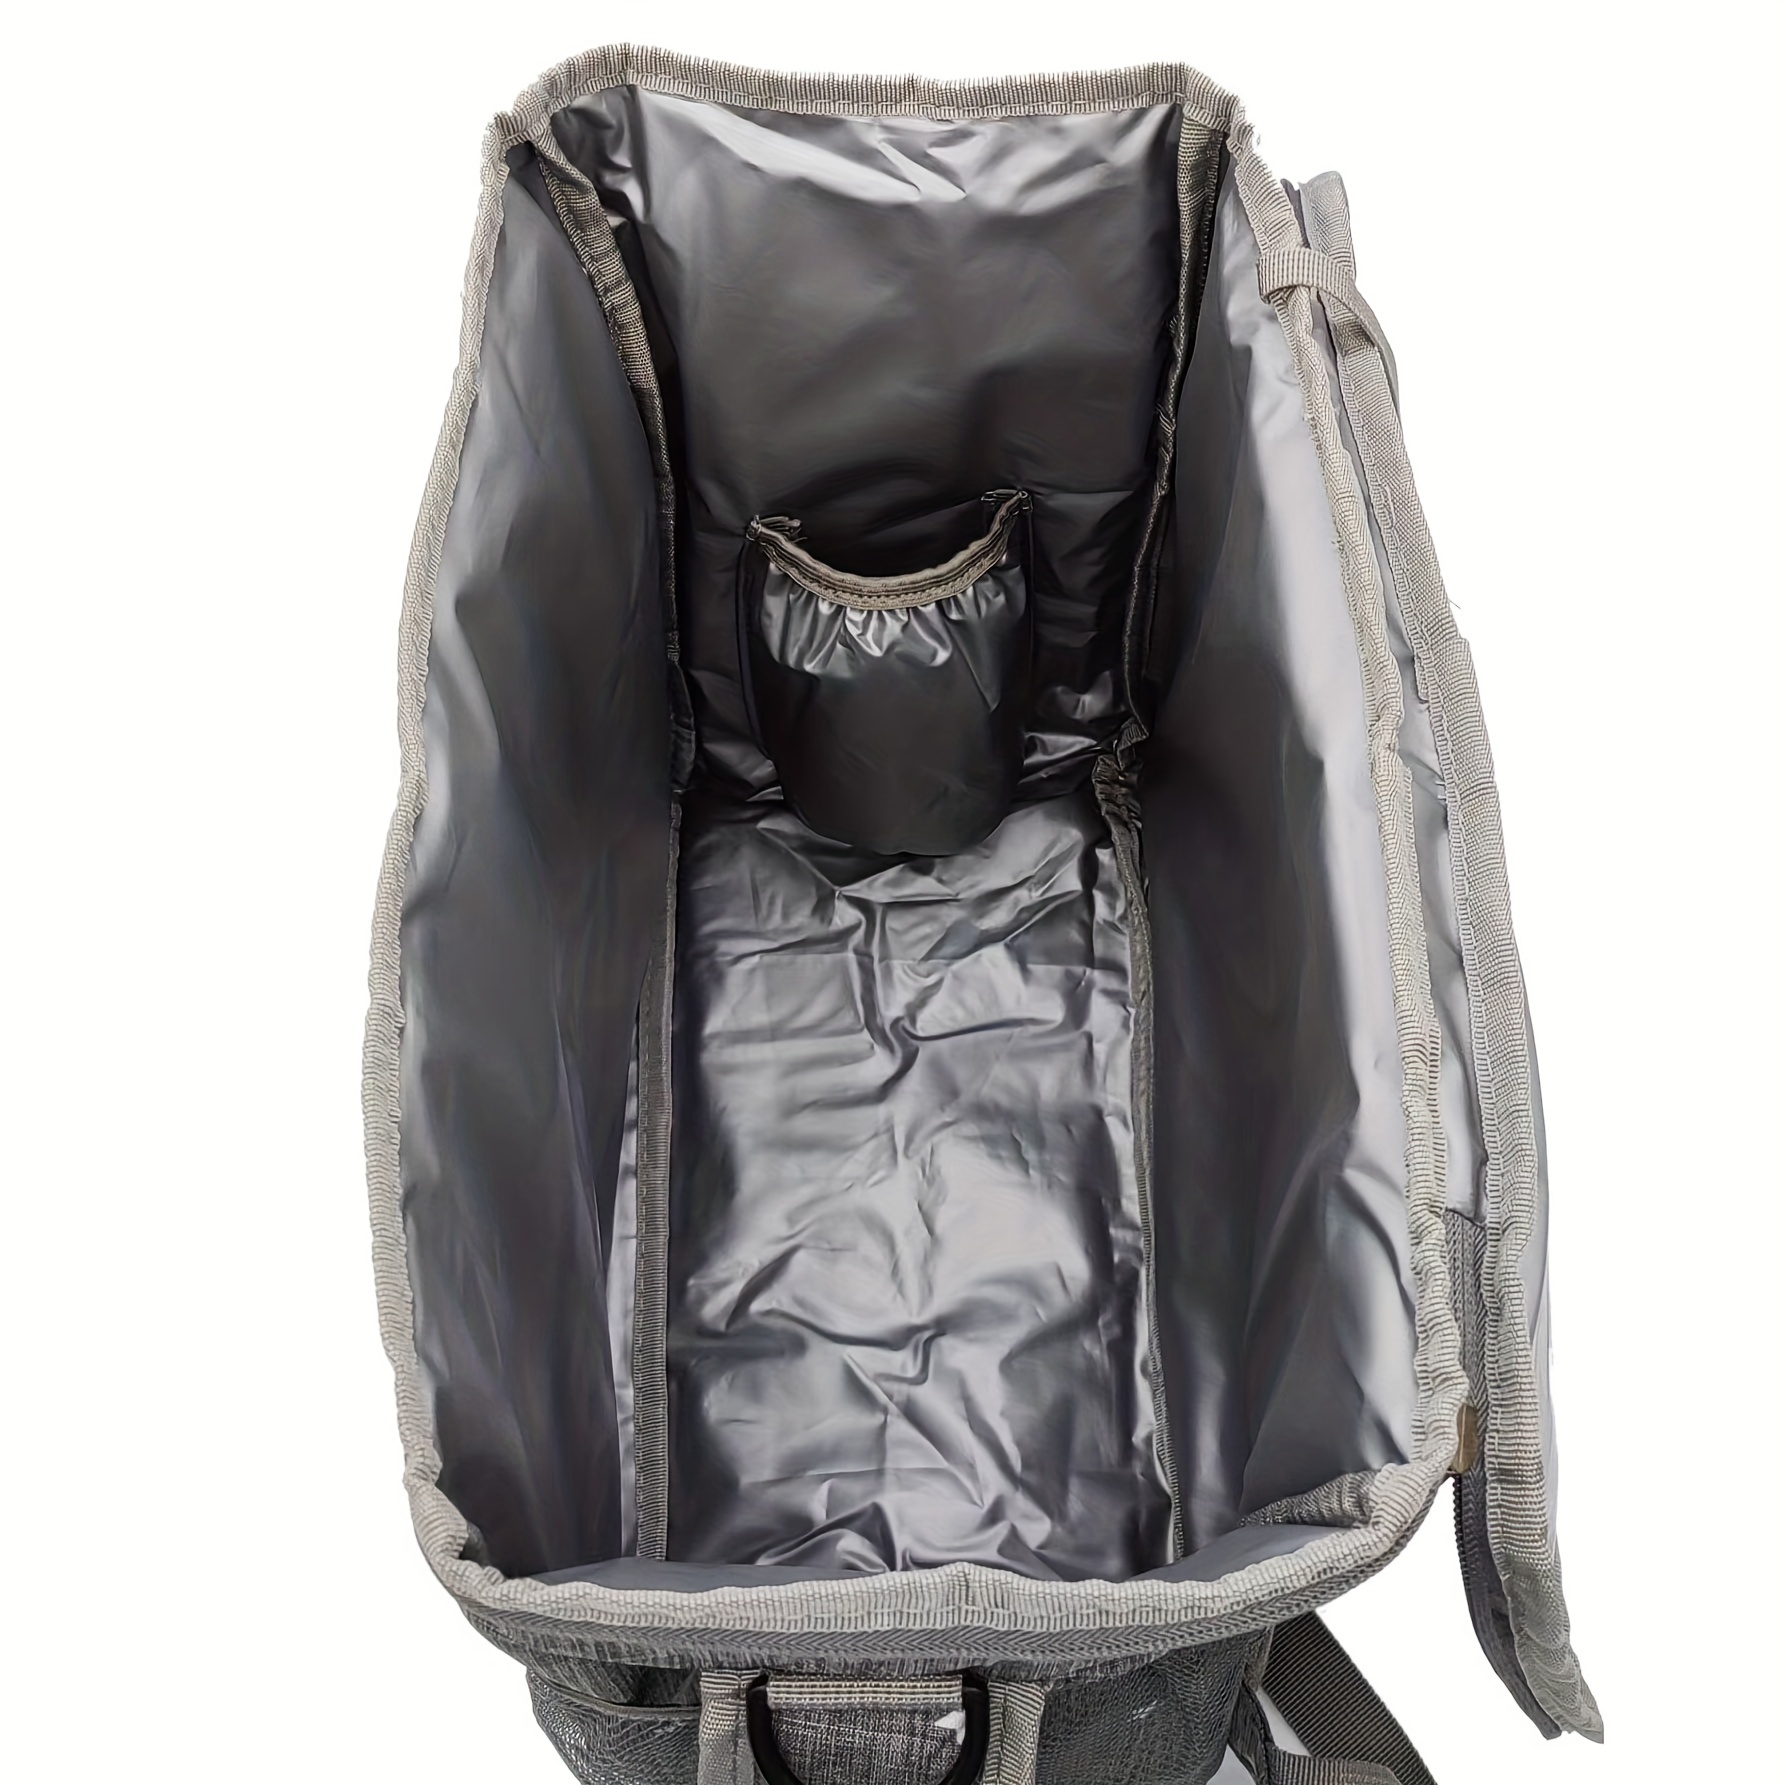 Baby Diaper Bags Mom Backpack Maternity Bag for Baby Large